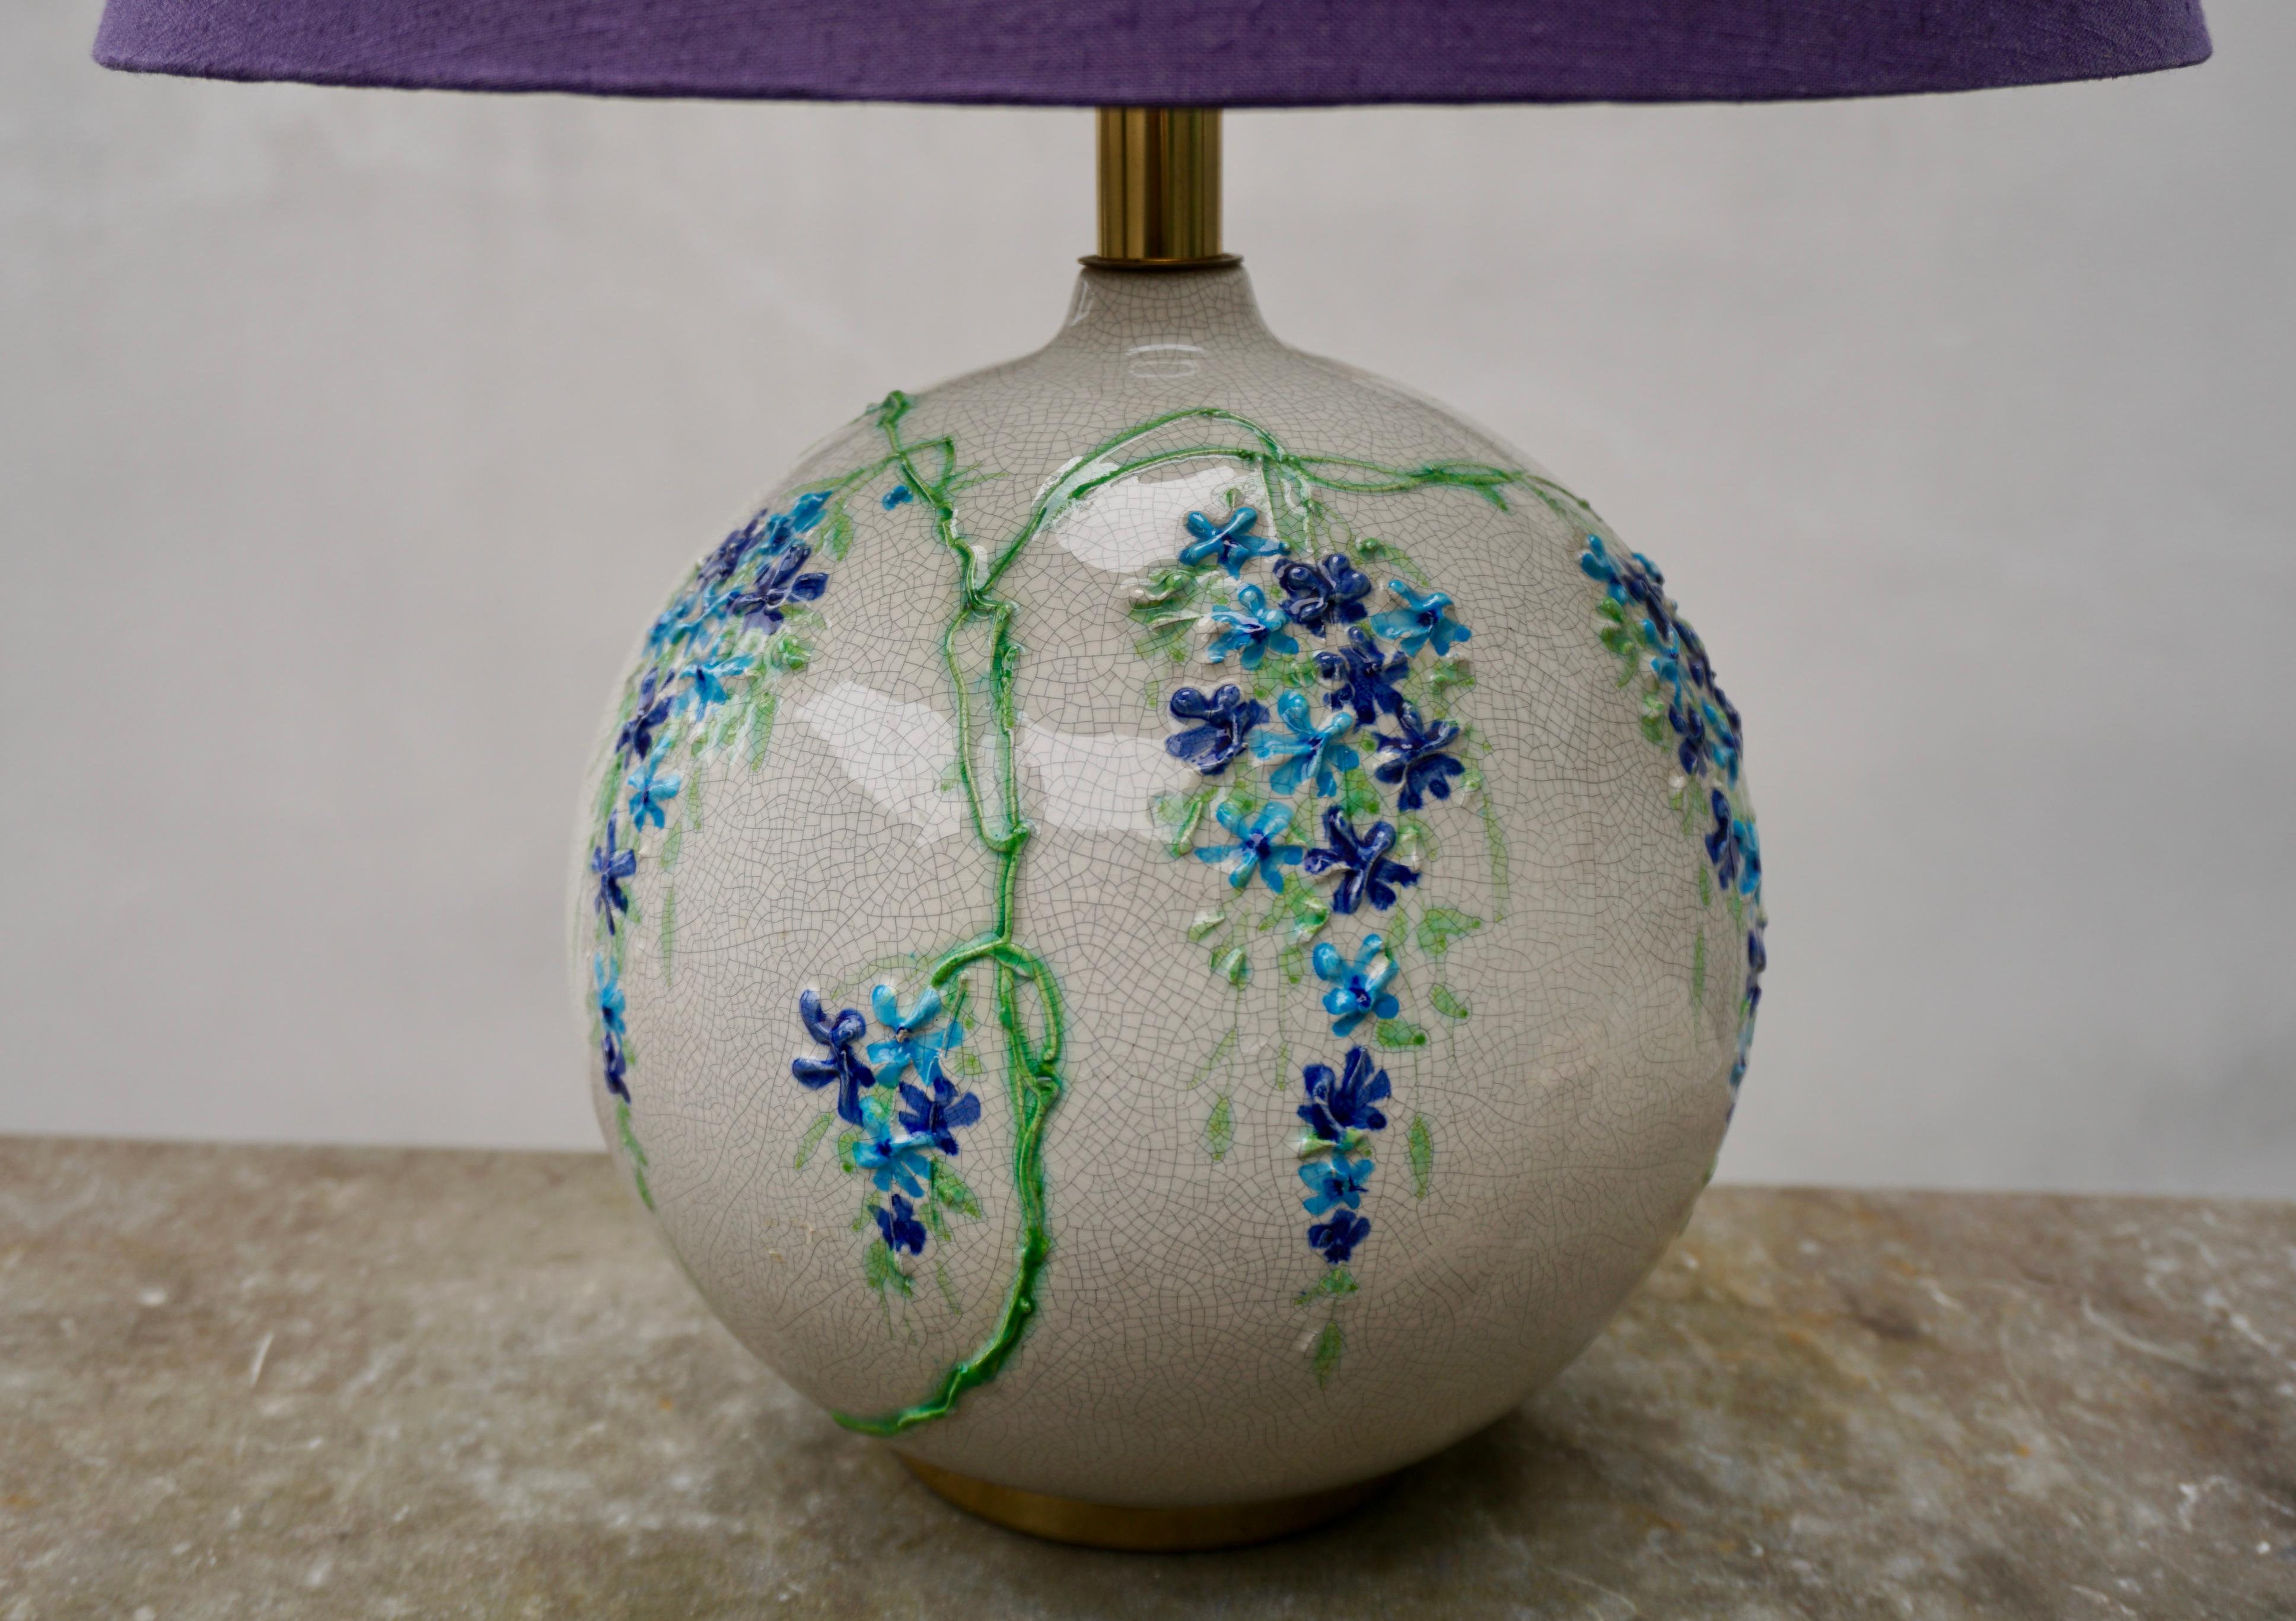 Glazed Colourful Ceramic Table Lamp by Alvino Bagni for Raymor For Sale